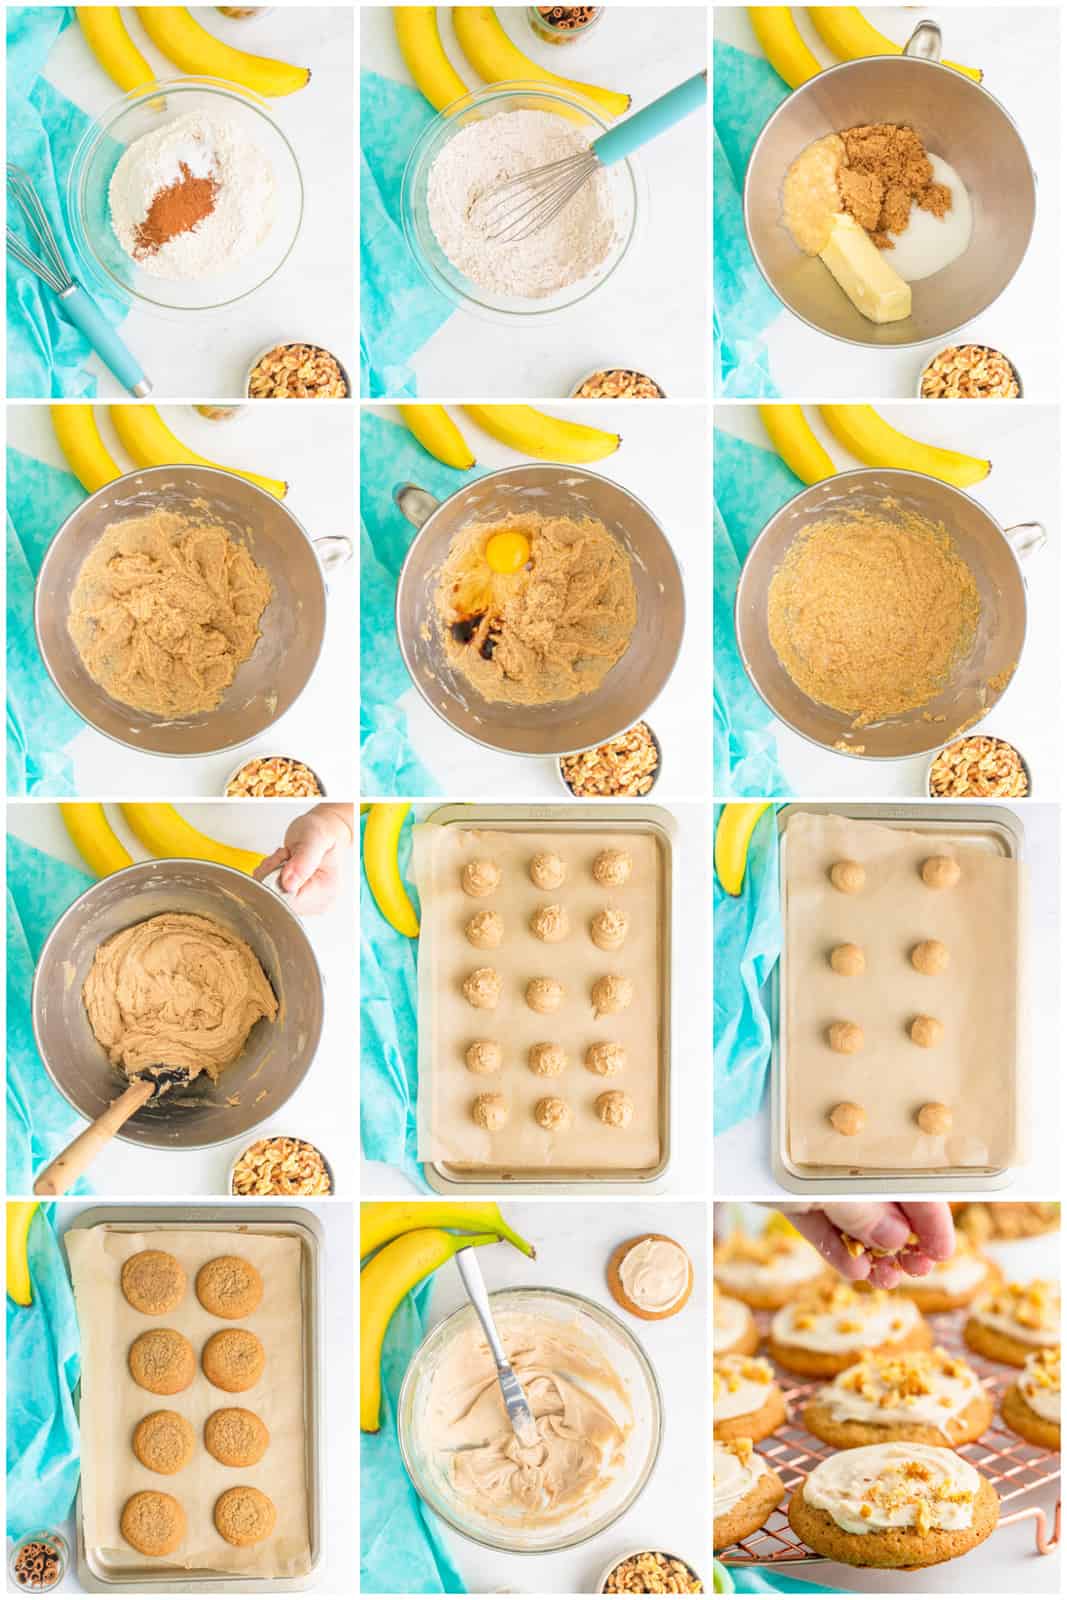 Step by step photos on how to make Banana Cookies